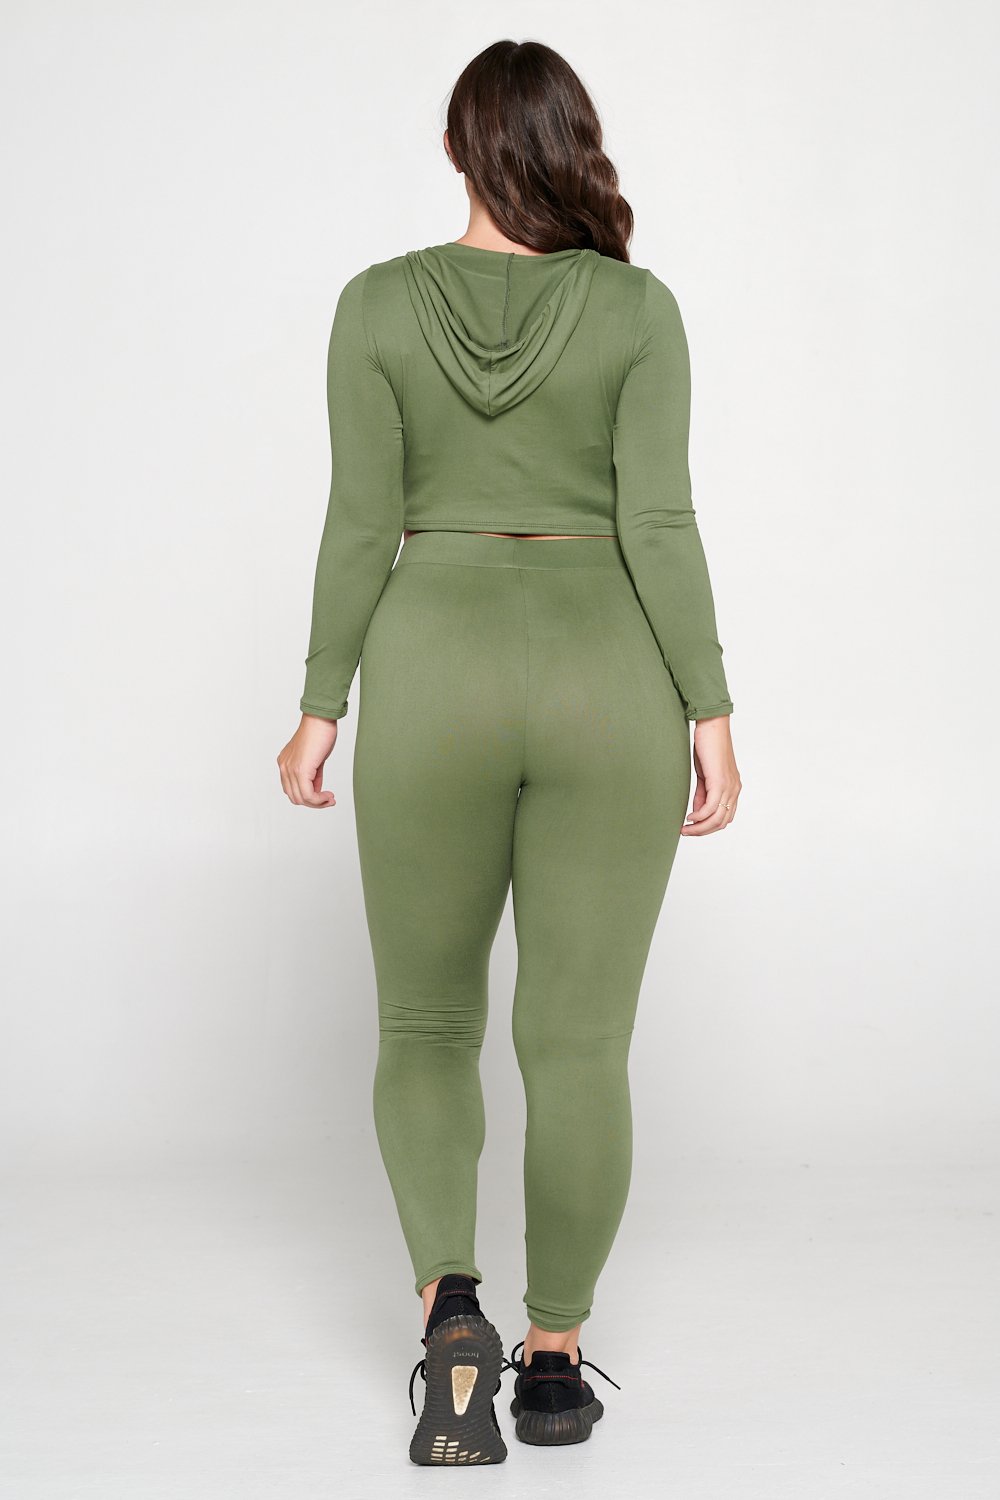 livd L I V D women's contemporary plus size  scoop neck crop hoodie and elastic band sweatpant with faux drawstring in moss green